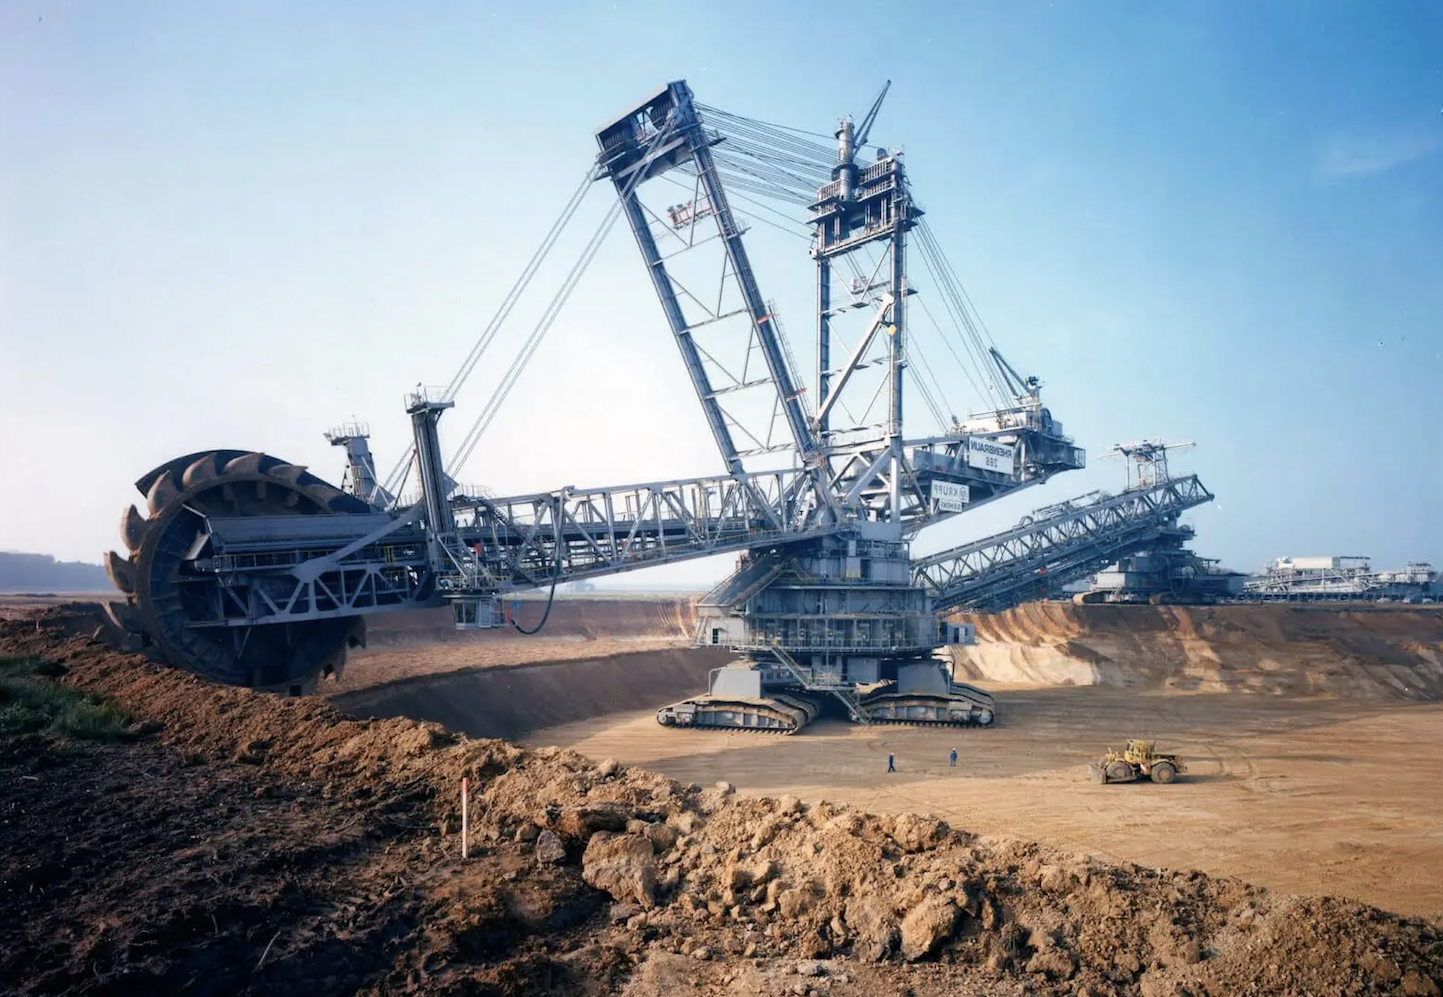 The <strong><a href="https://www.ebaumsworld.com/articles/inside-the-bagger-288-the-megamachine-destroying-the-german-countryside/87340787/">Bagger 288</a></strong> is the biggest and heaviest land vehicle in the world. 